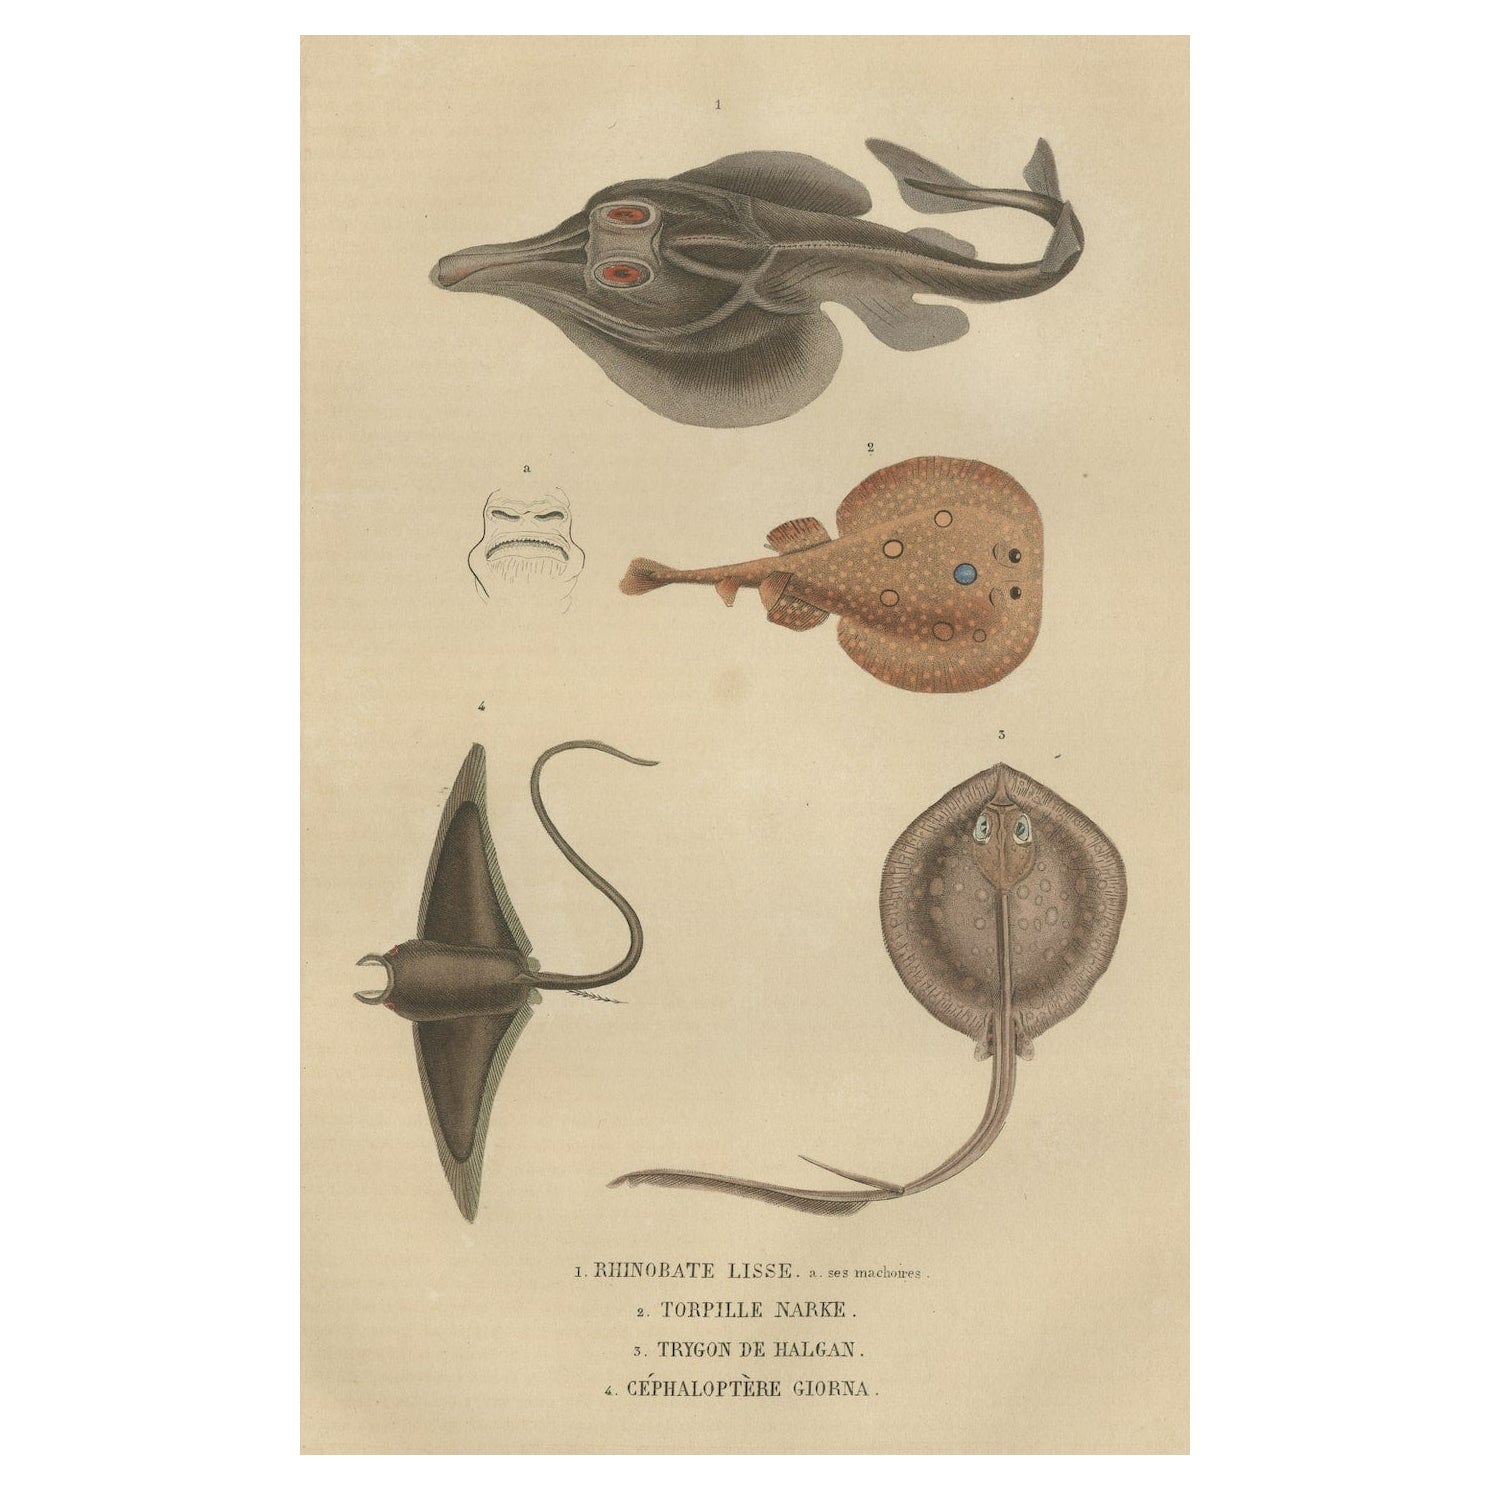 Print of a Guitarfish, Common Torpedo, Stingray & Devil fish or Giant Devil Ray For Sale